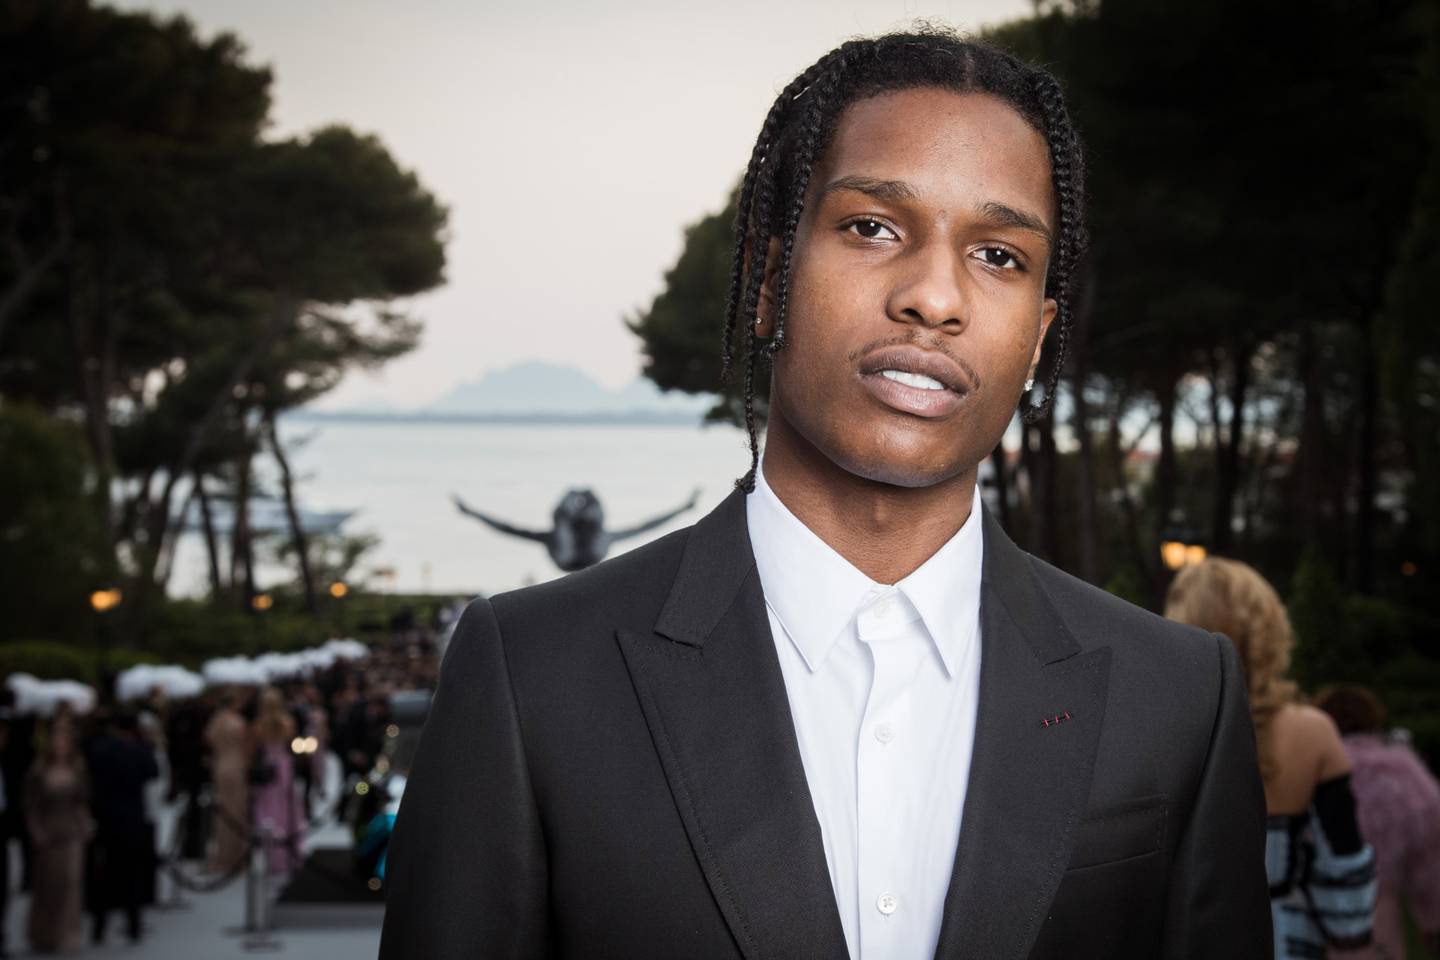 SPOTTED: ASAP Rocky Vlone in Testing Pants & Jacket at Rick Owens